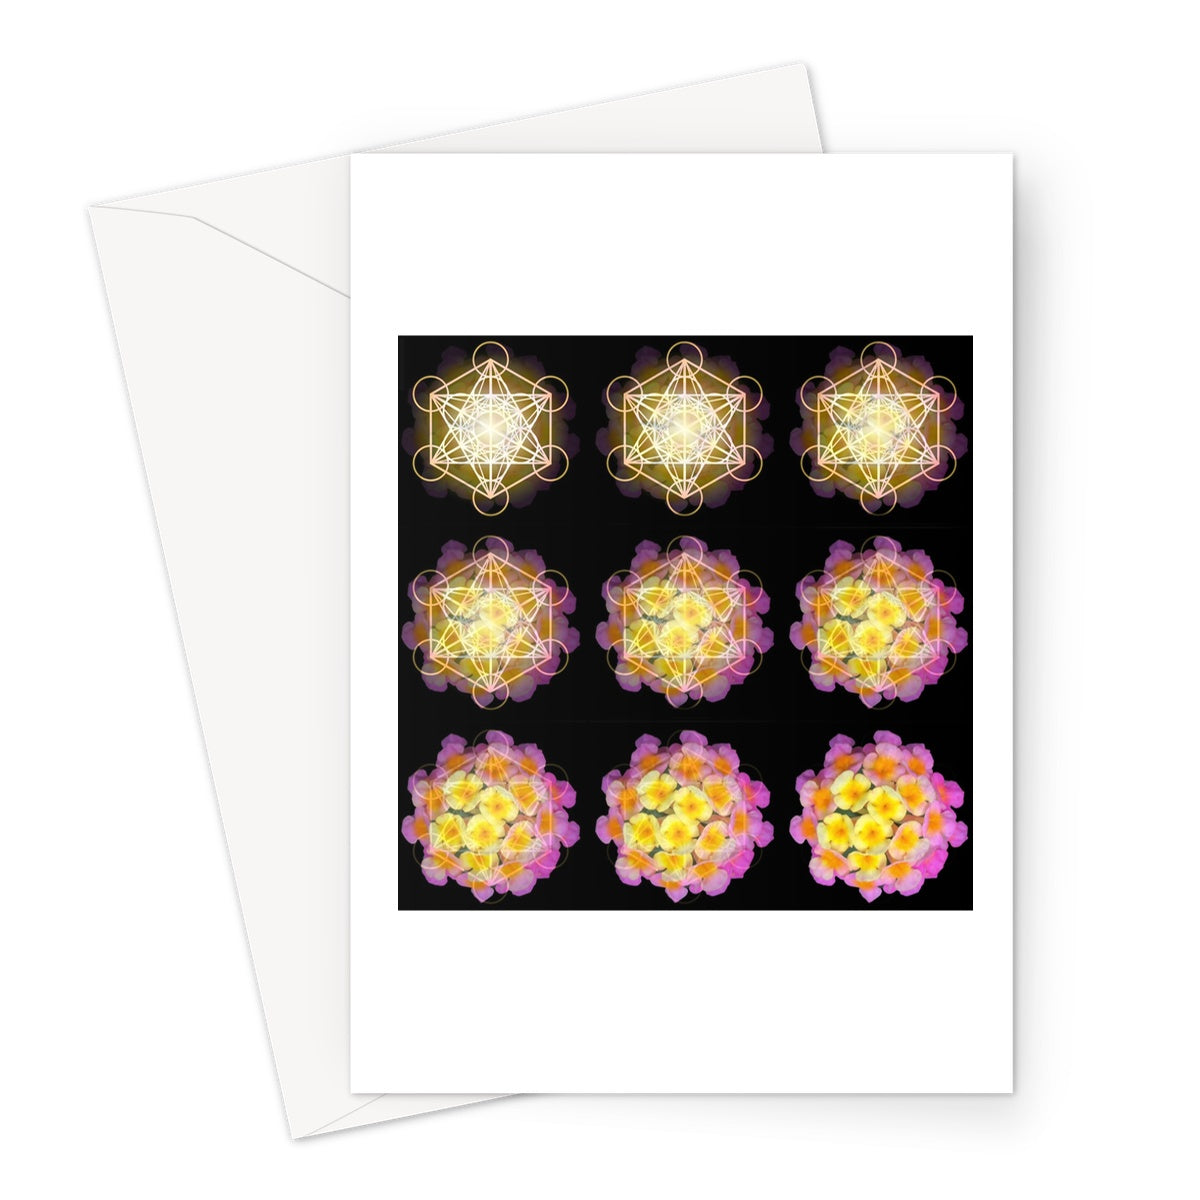 The Geometry of a Flower 2 Greeting Card